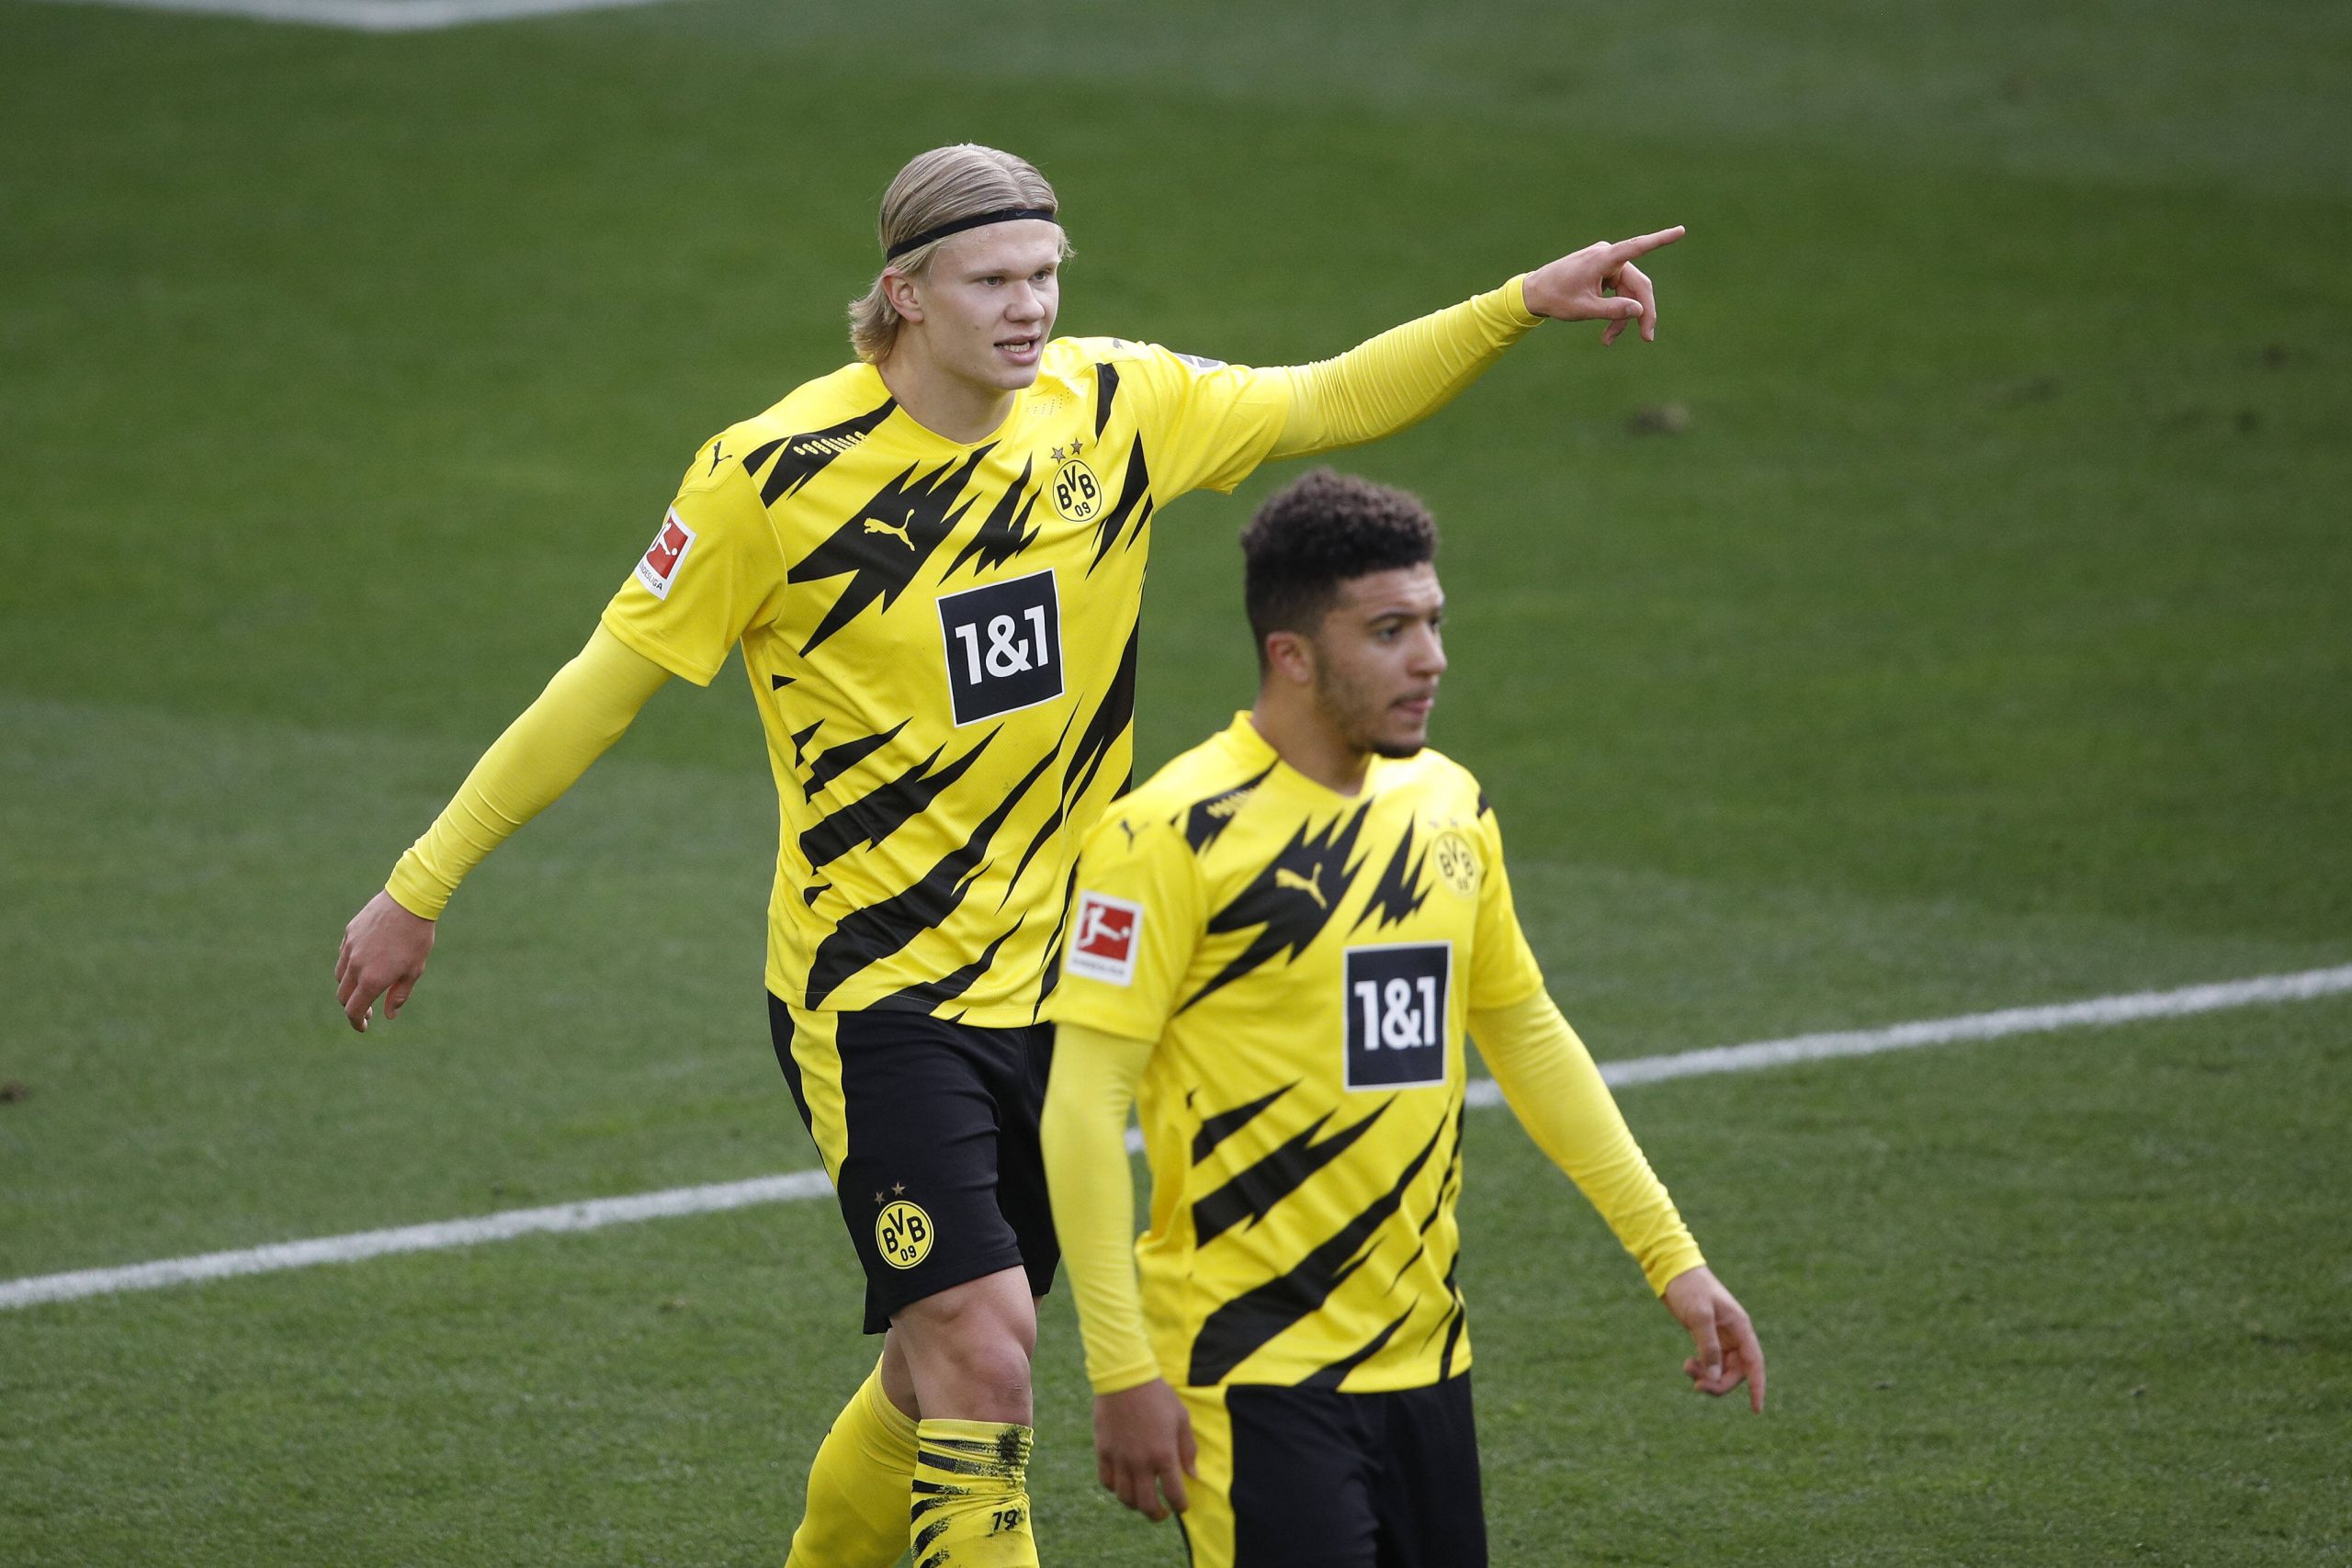 Manchester United are ready to pay the release clause of Borussia Dortmund star Erling Haaland.